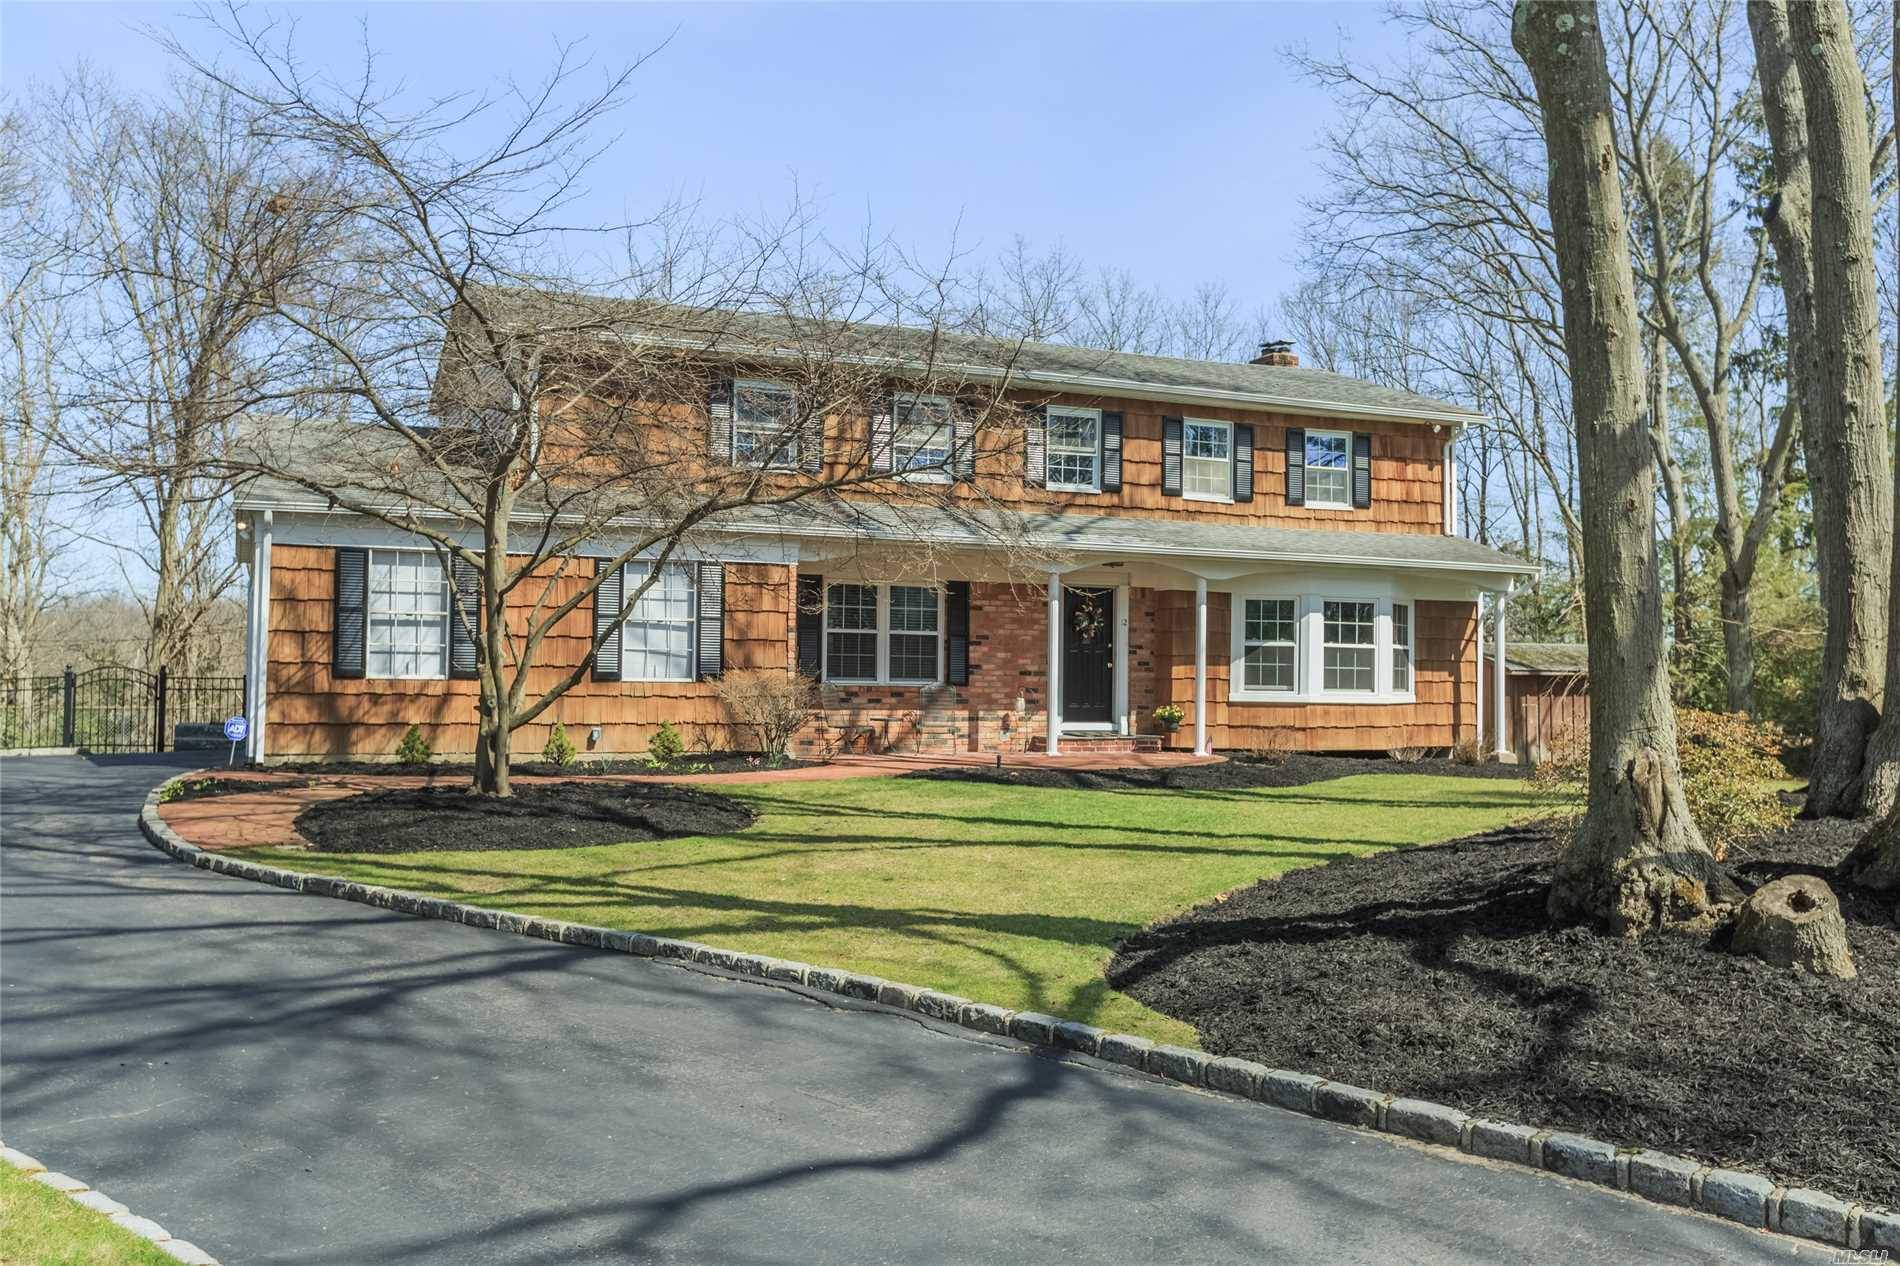 Come See This Spacious 5 Bedroom Center Hall Colonial In The Desirable Legend Wood Community Of North Smithtown!